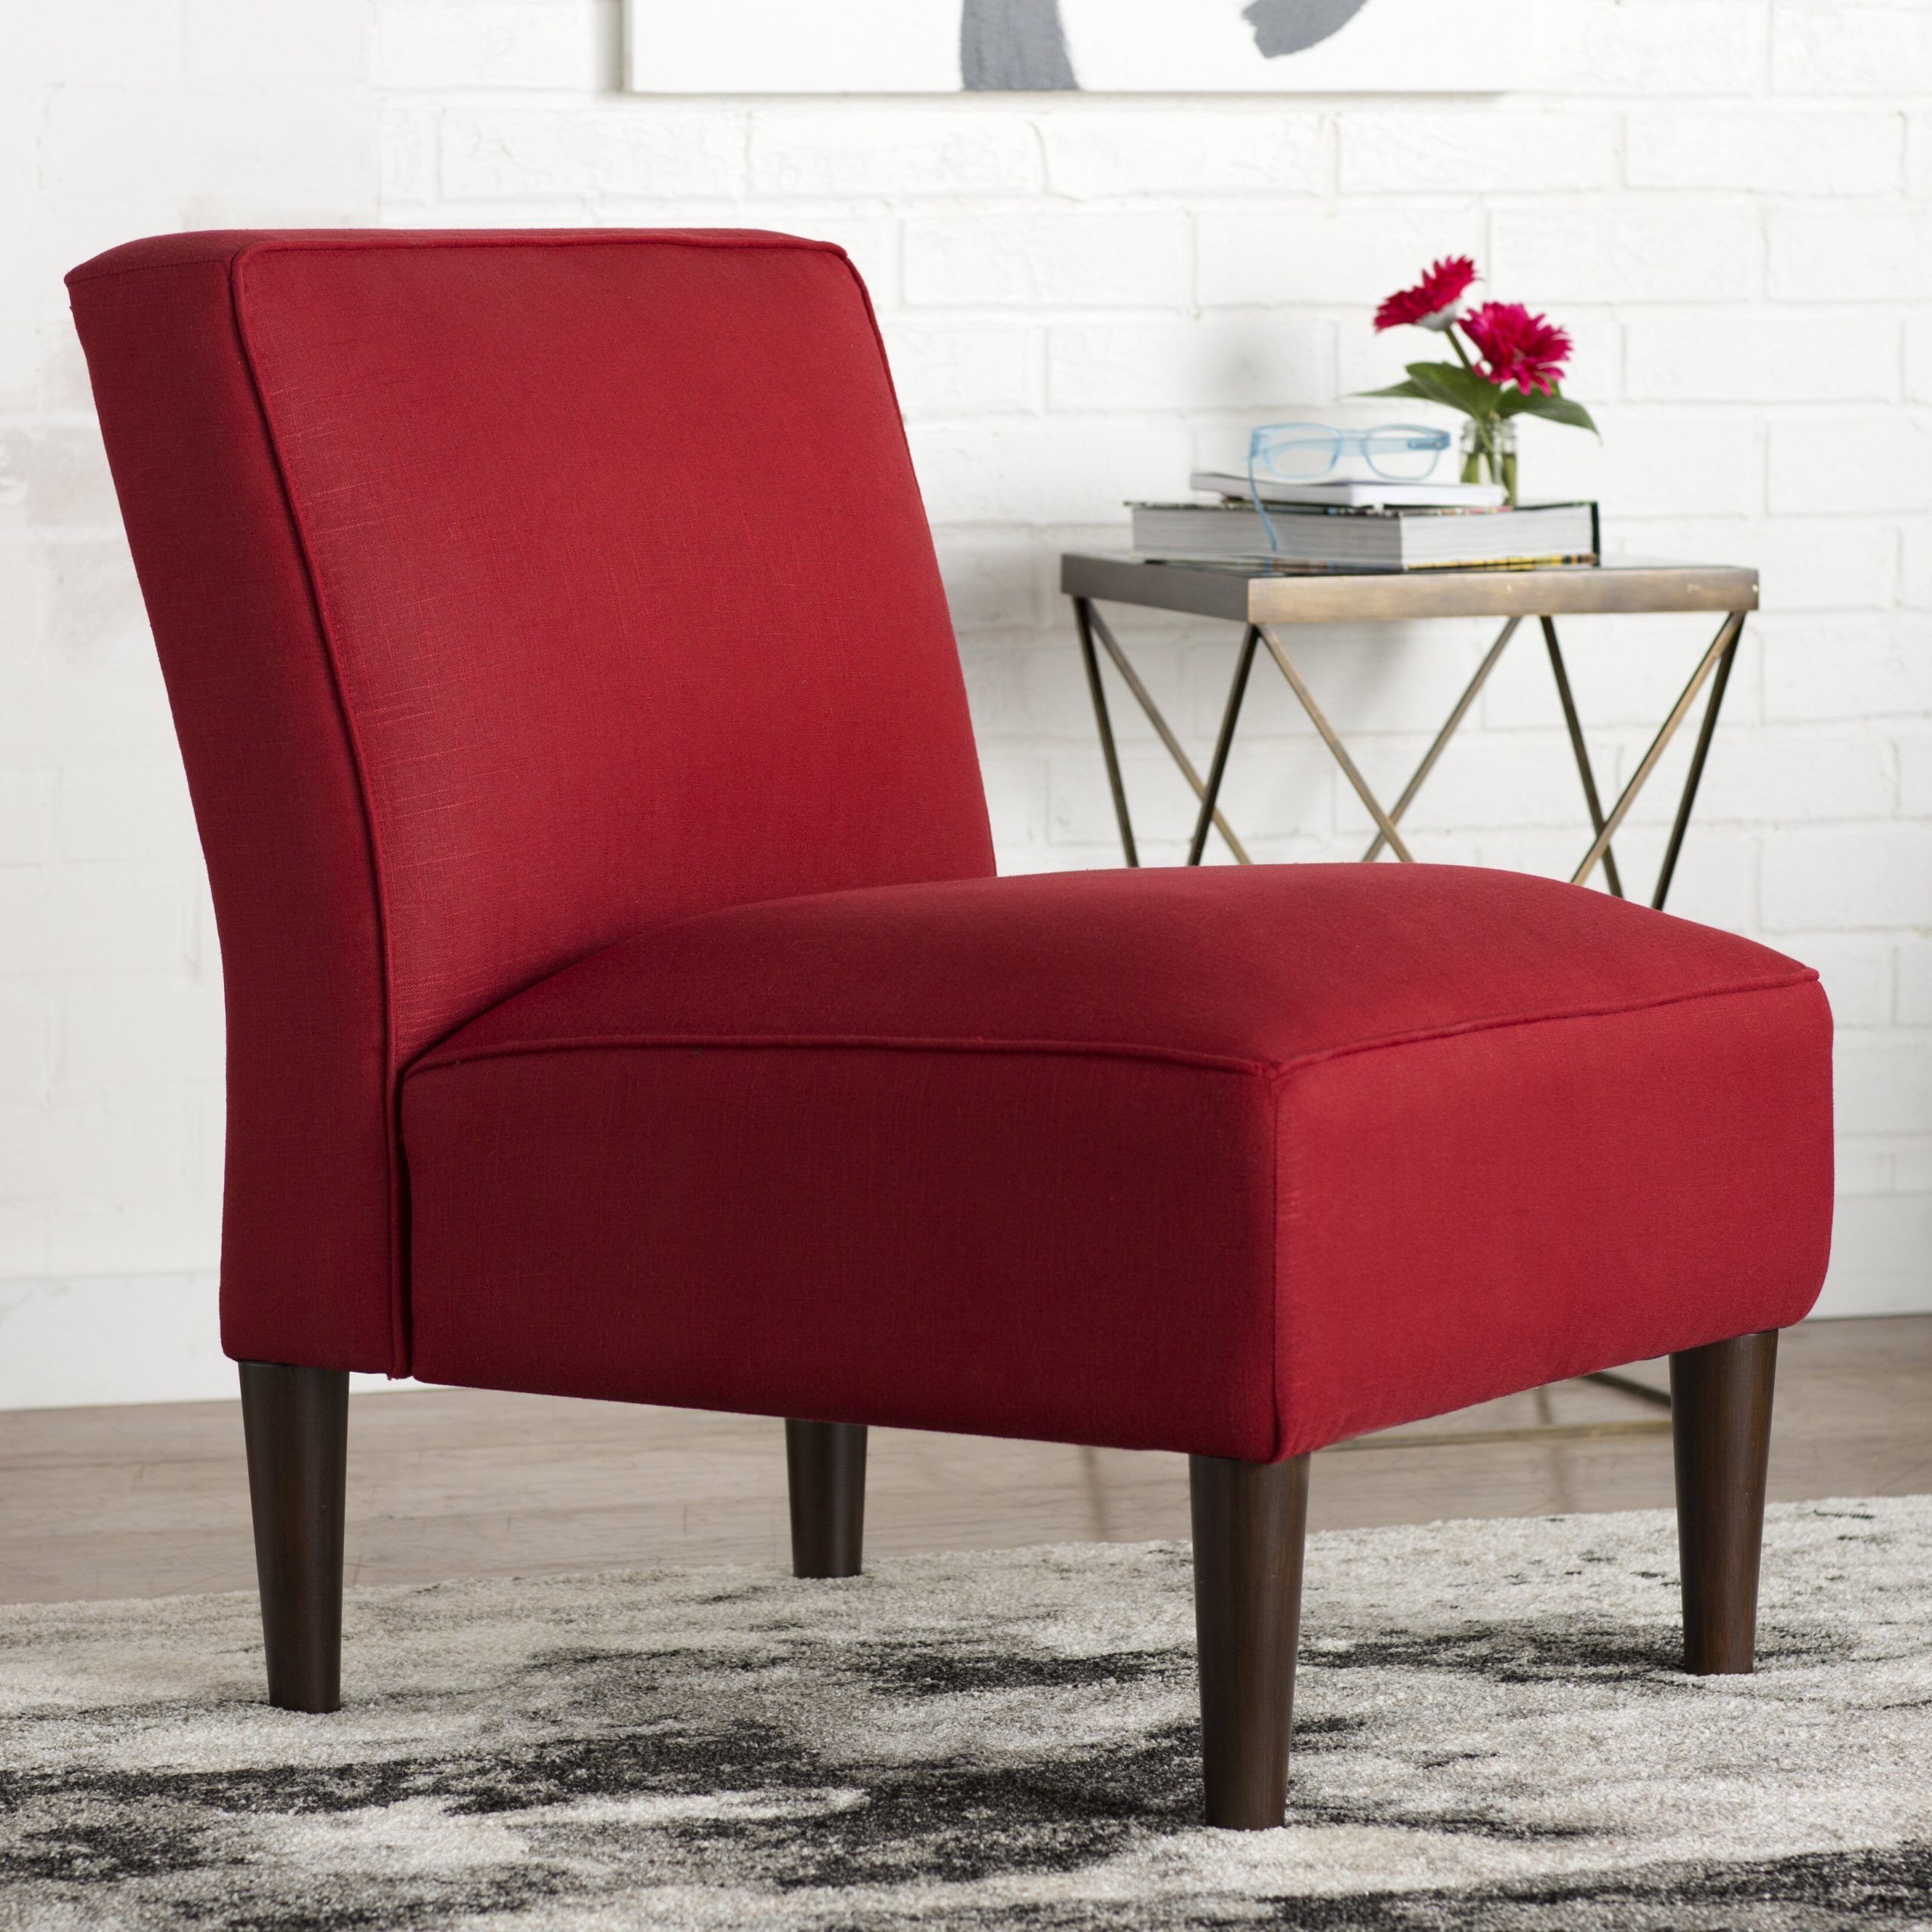 Easterling Velvet Slipper Chairs Intended For Best And Newest Red Slipper Accent Chairs You'll Love In  (View 2 of 20)